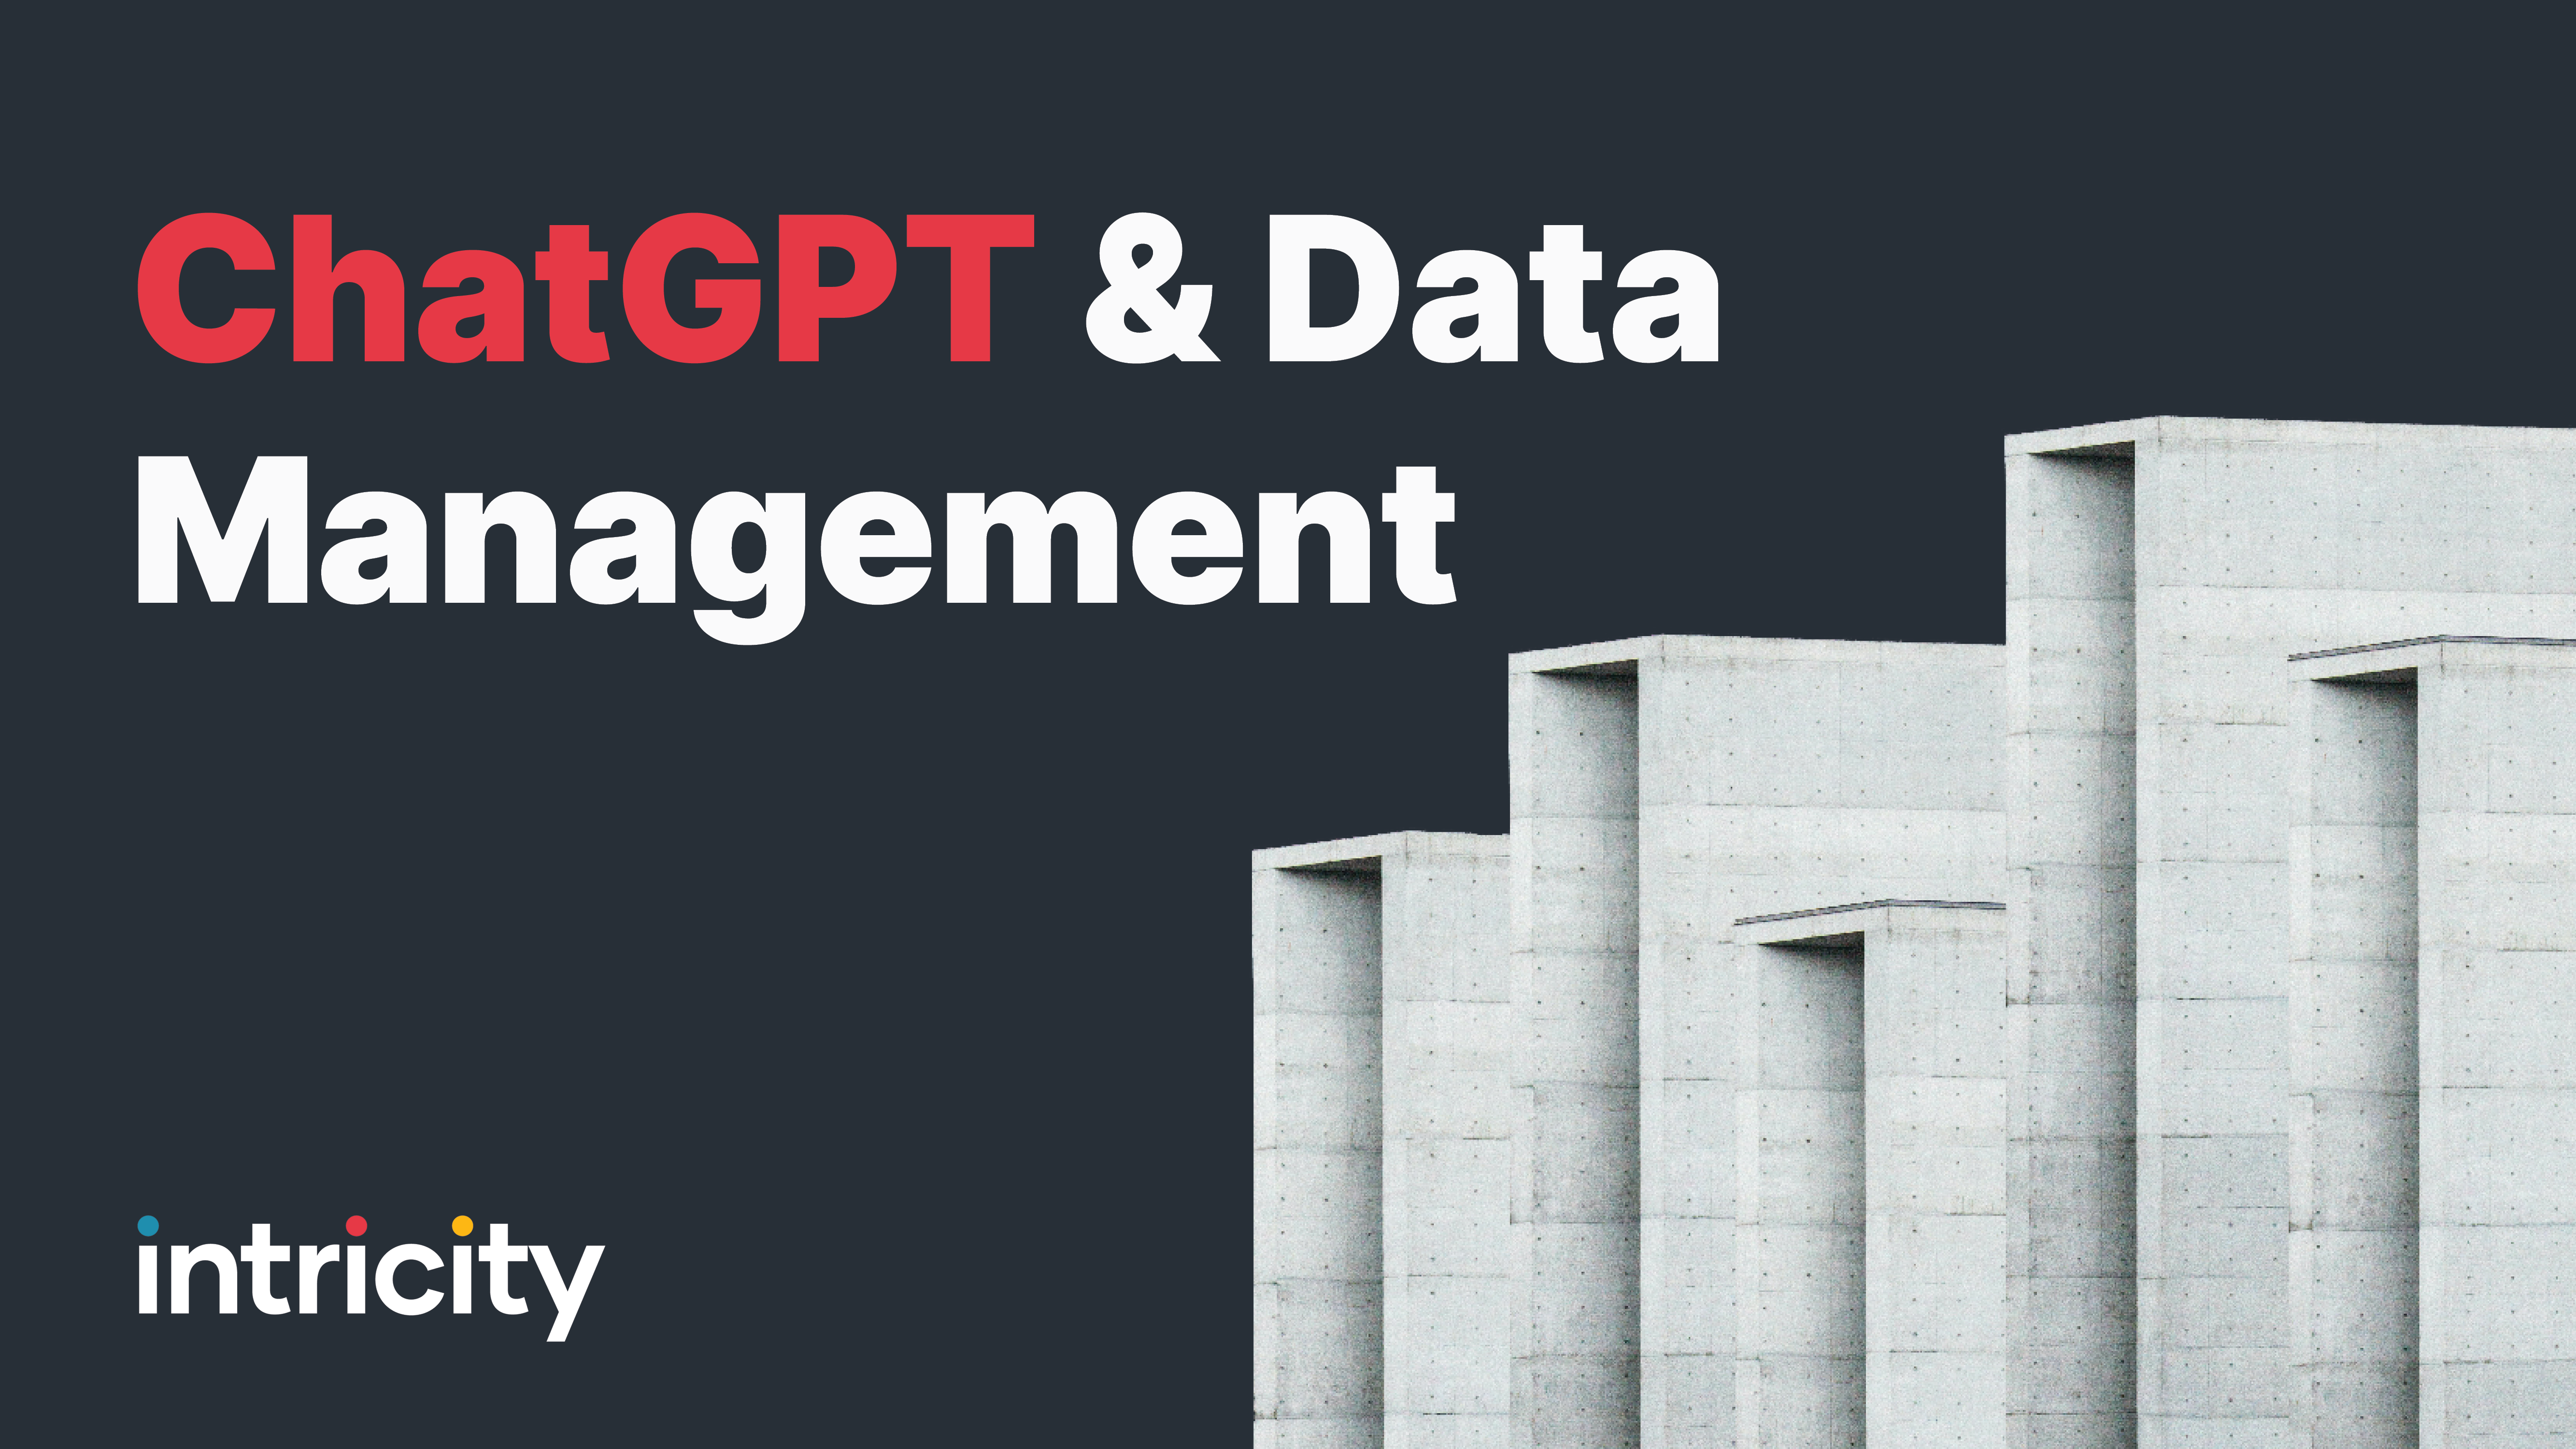 ChatGPT and data management